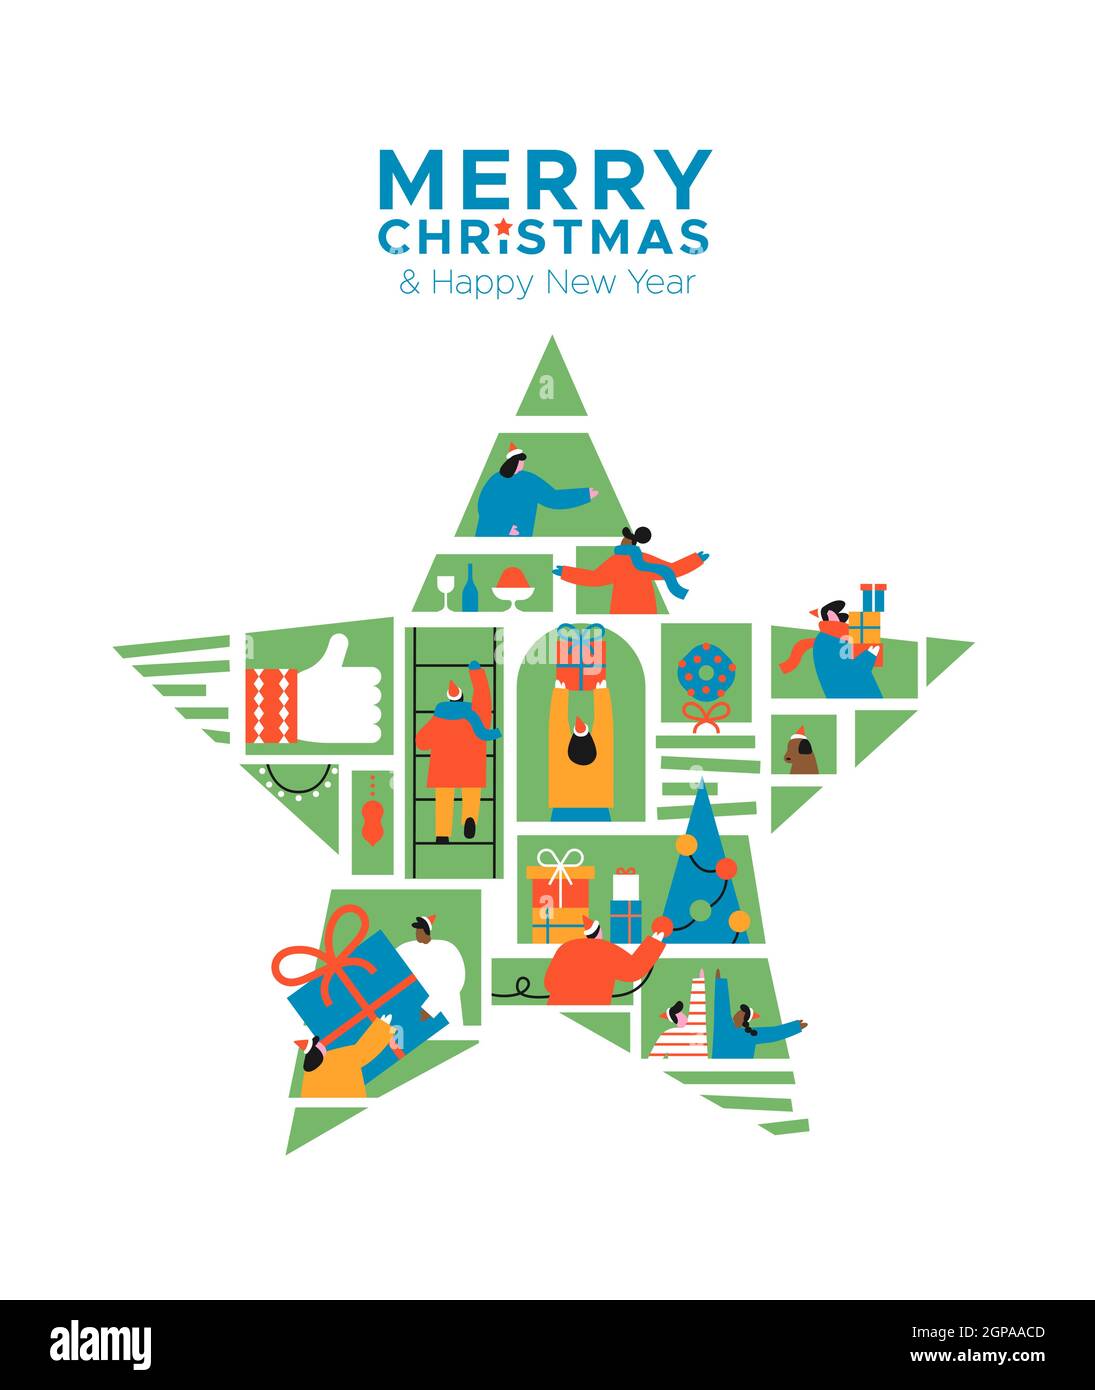 Merry Christmas Happy New Year greeting card illustration of diverse people connected online inside star ornament. Internet social connection concept Stock Vector